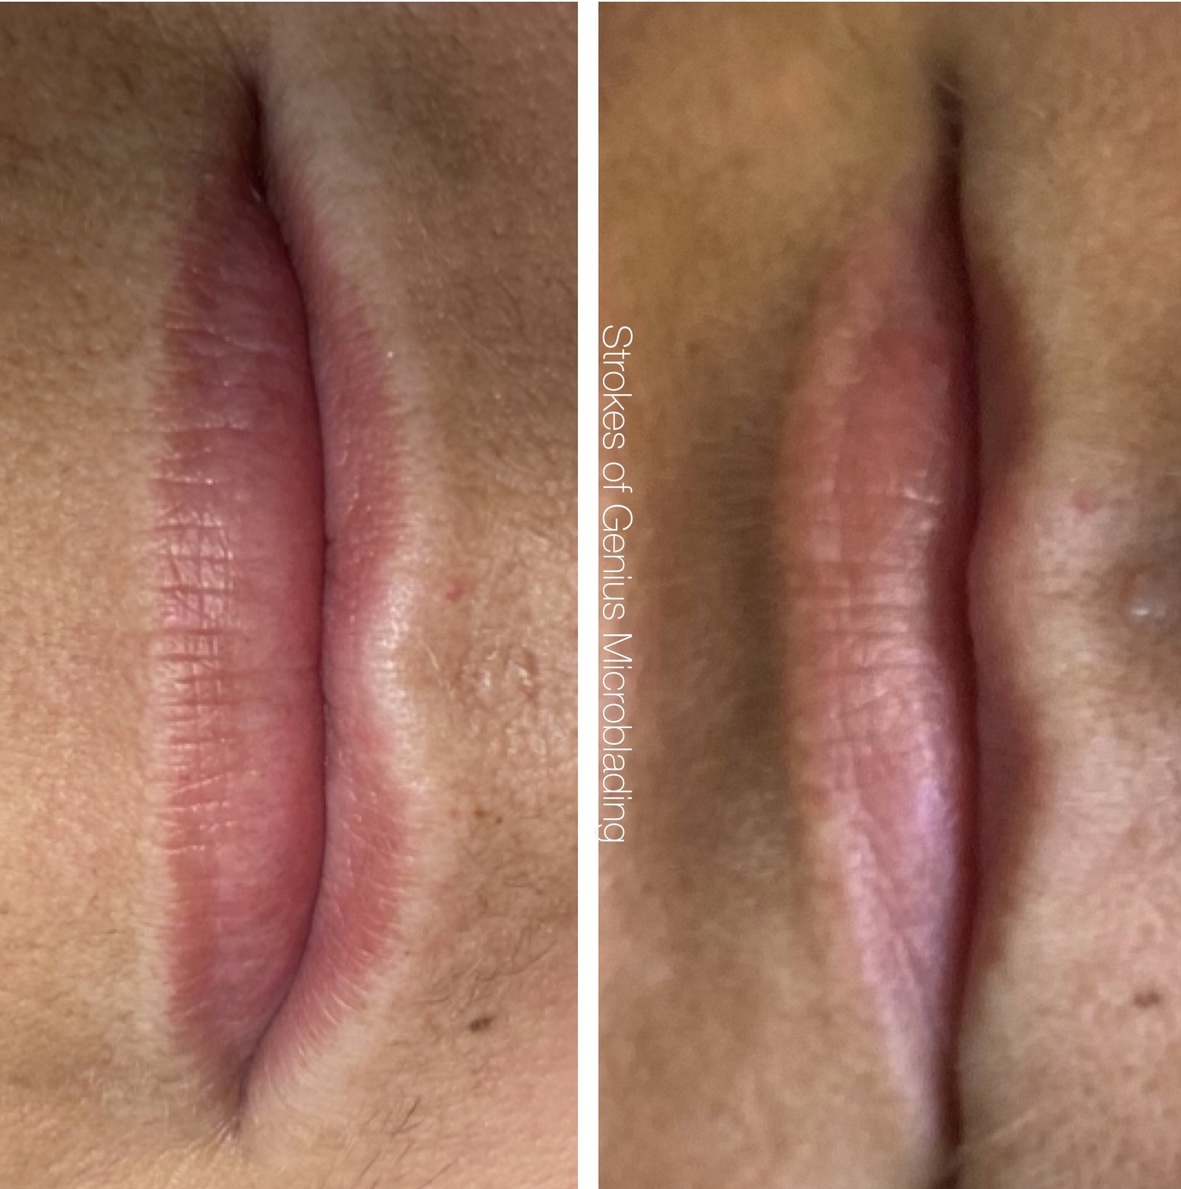 Does Lip Blushing Look Real?